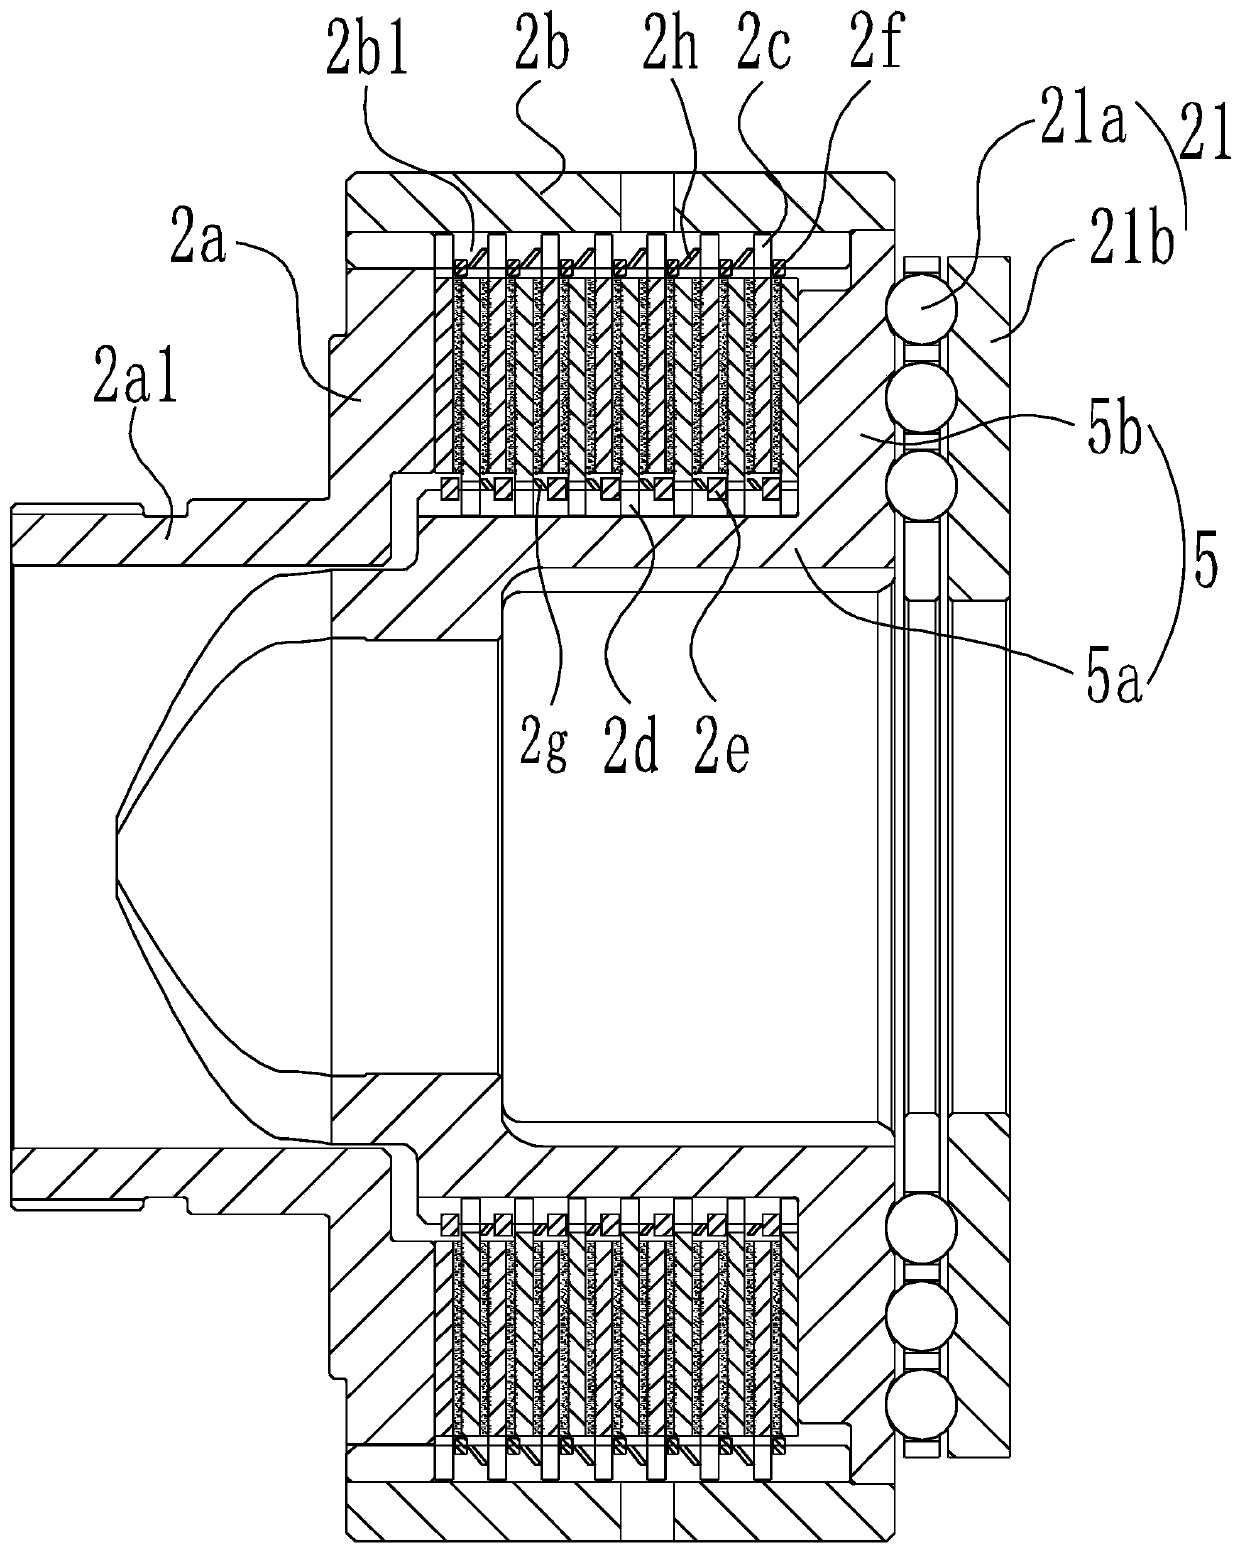 Adaptive multi-plate sequencing large-torque friction clutch device with one-way transmission function